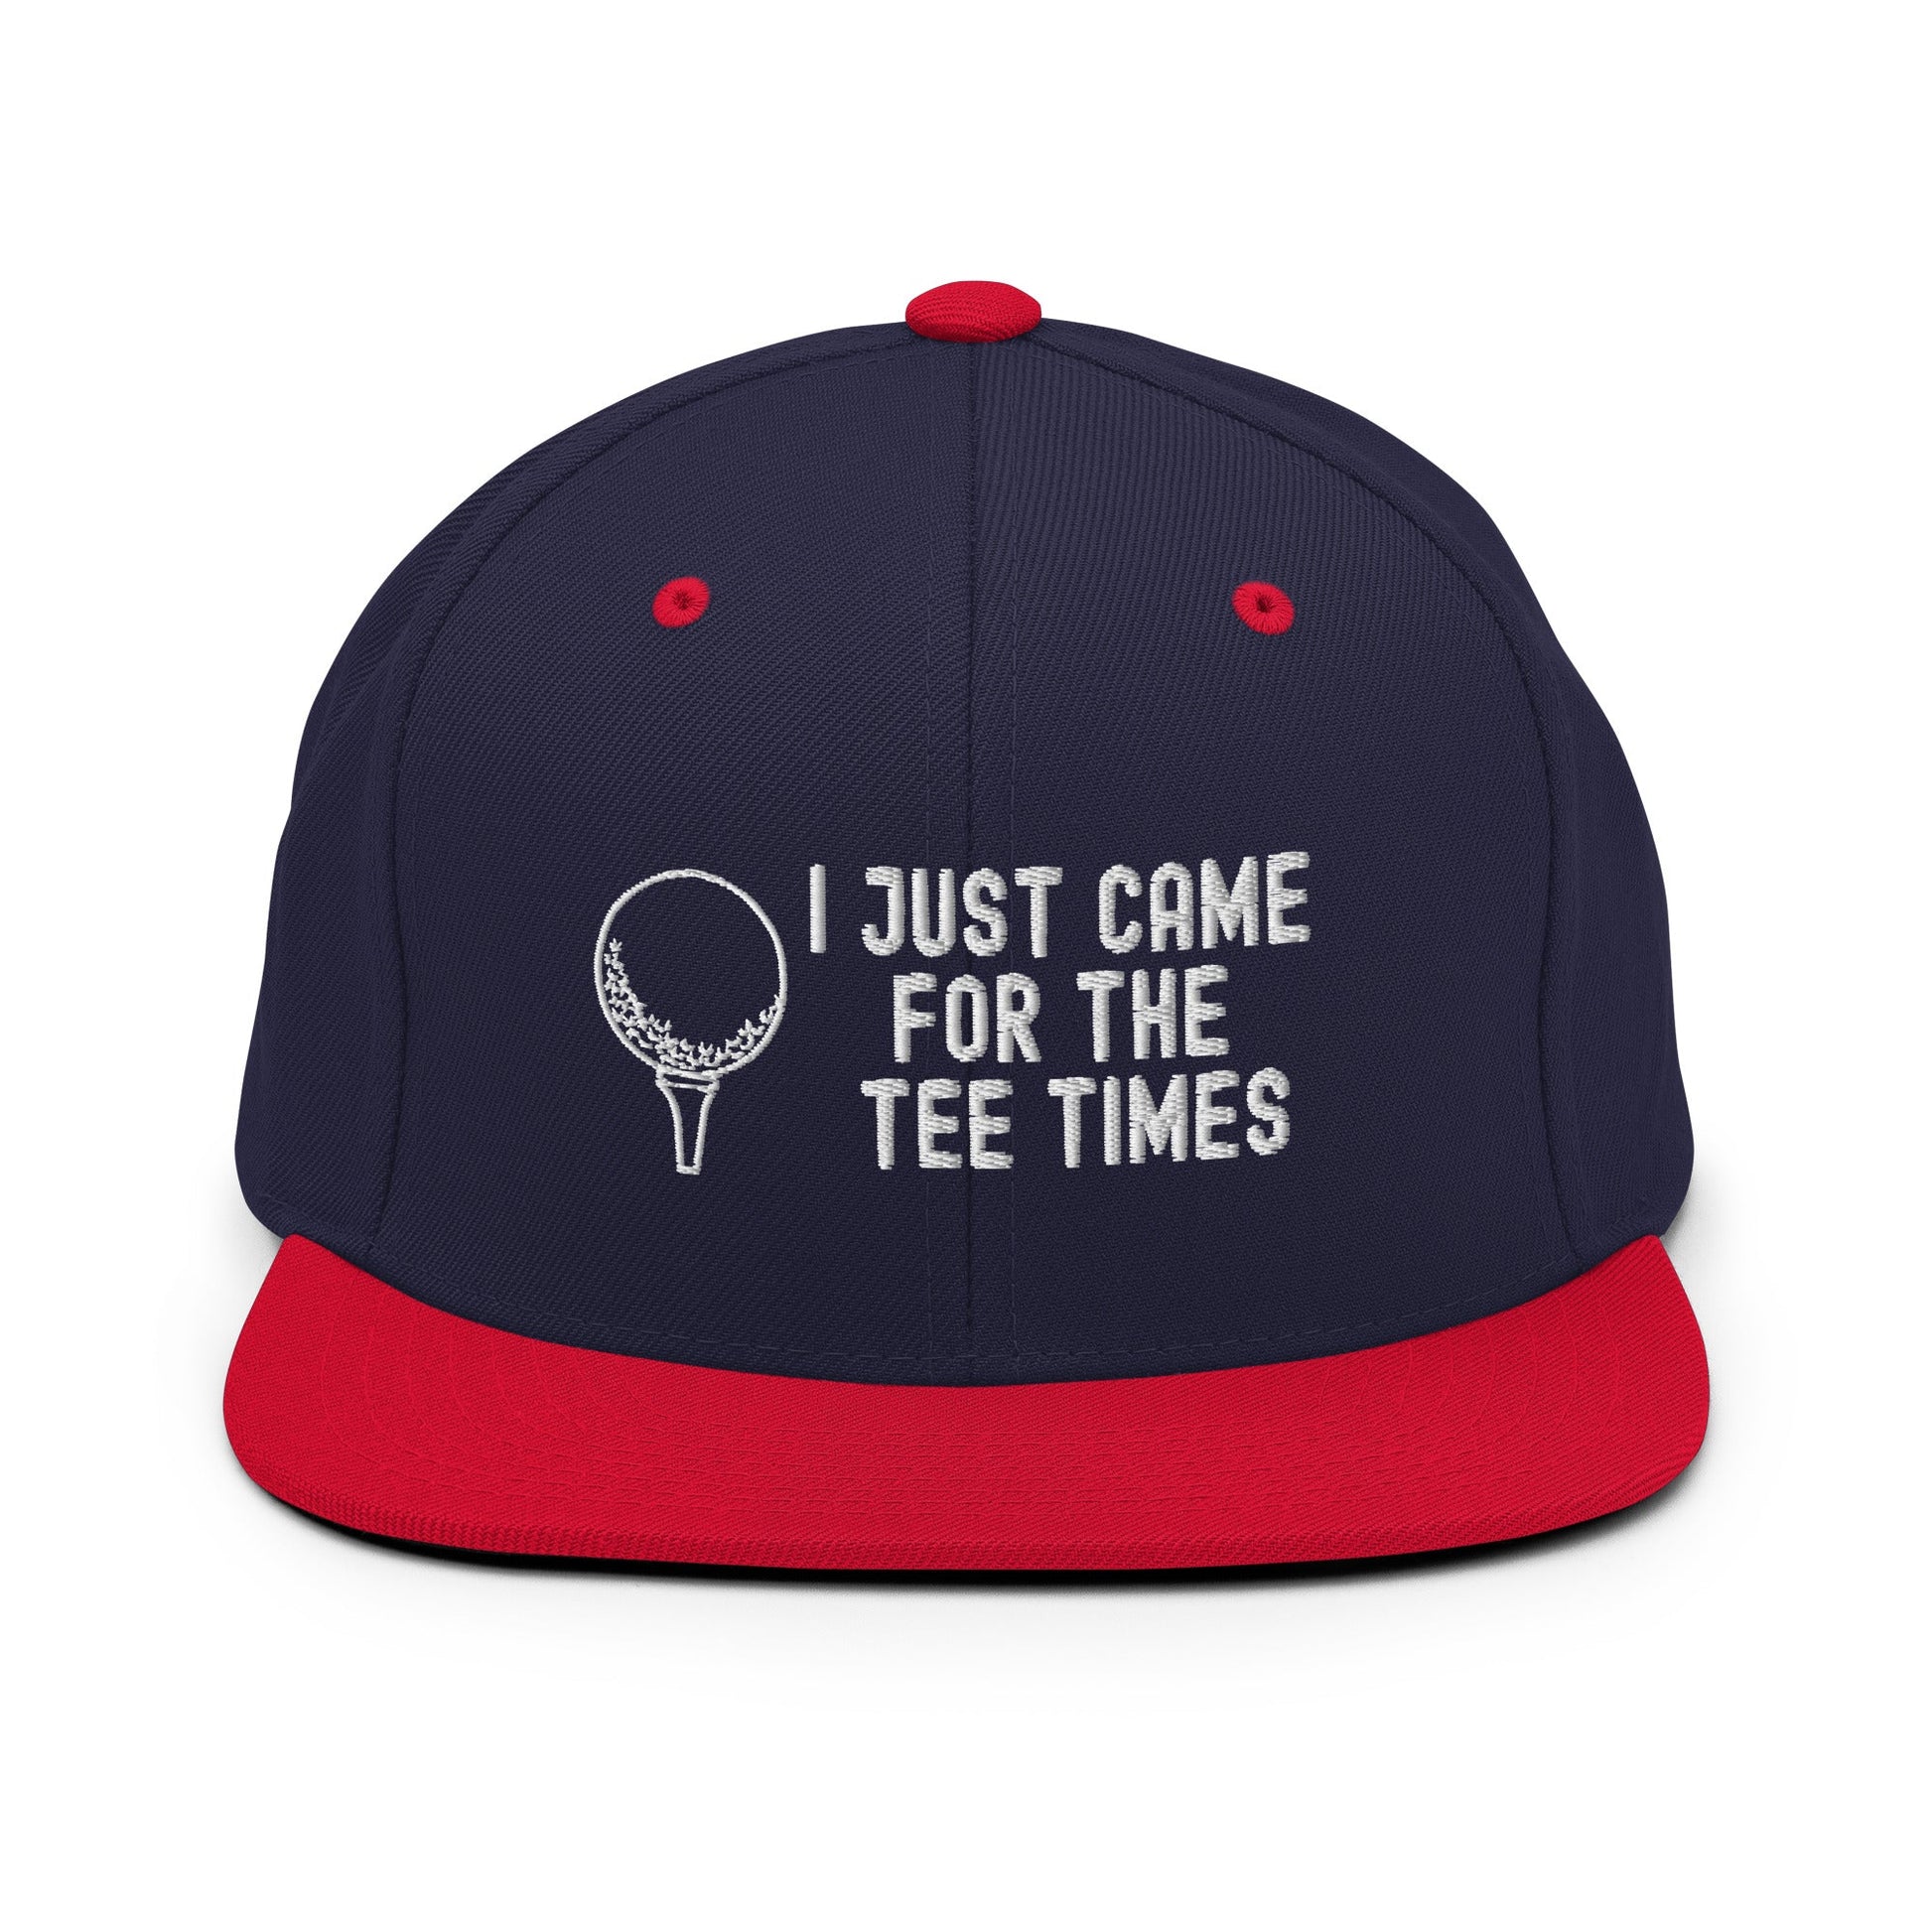 Funny Golfer Gifts  Snapback Hat Navy/ Red I Just Came For The Tee Times Snapback Hat